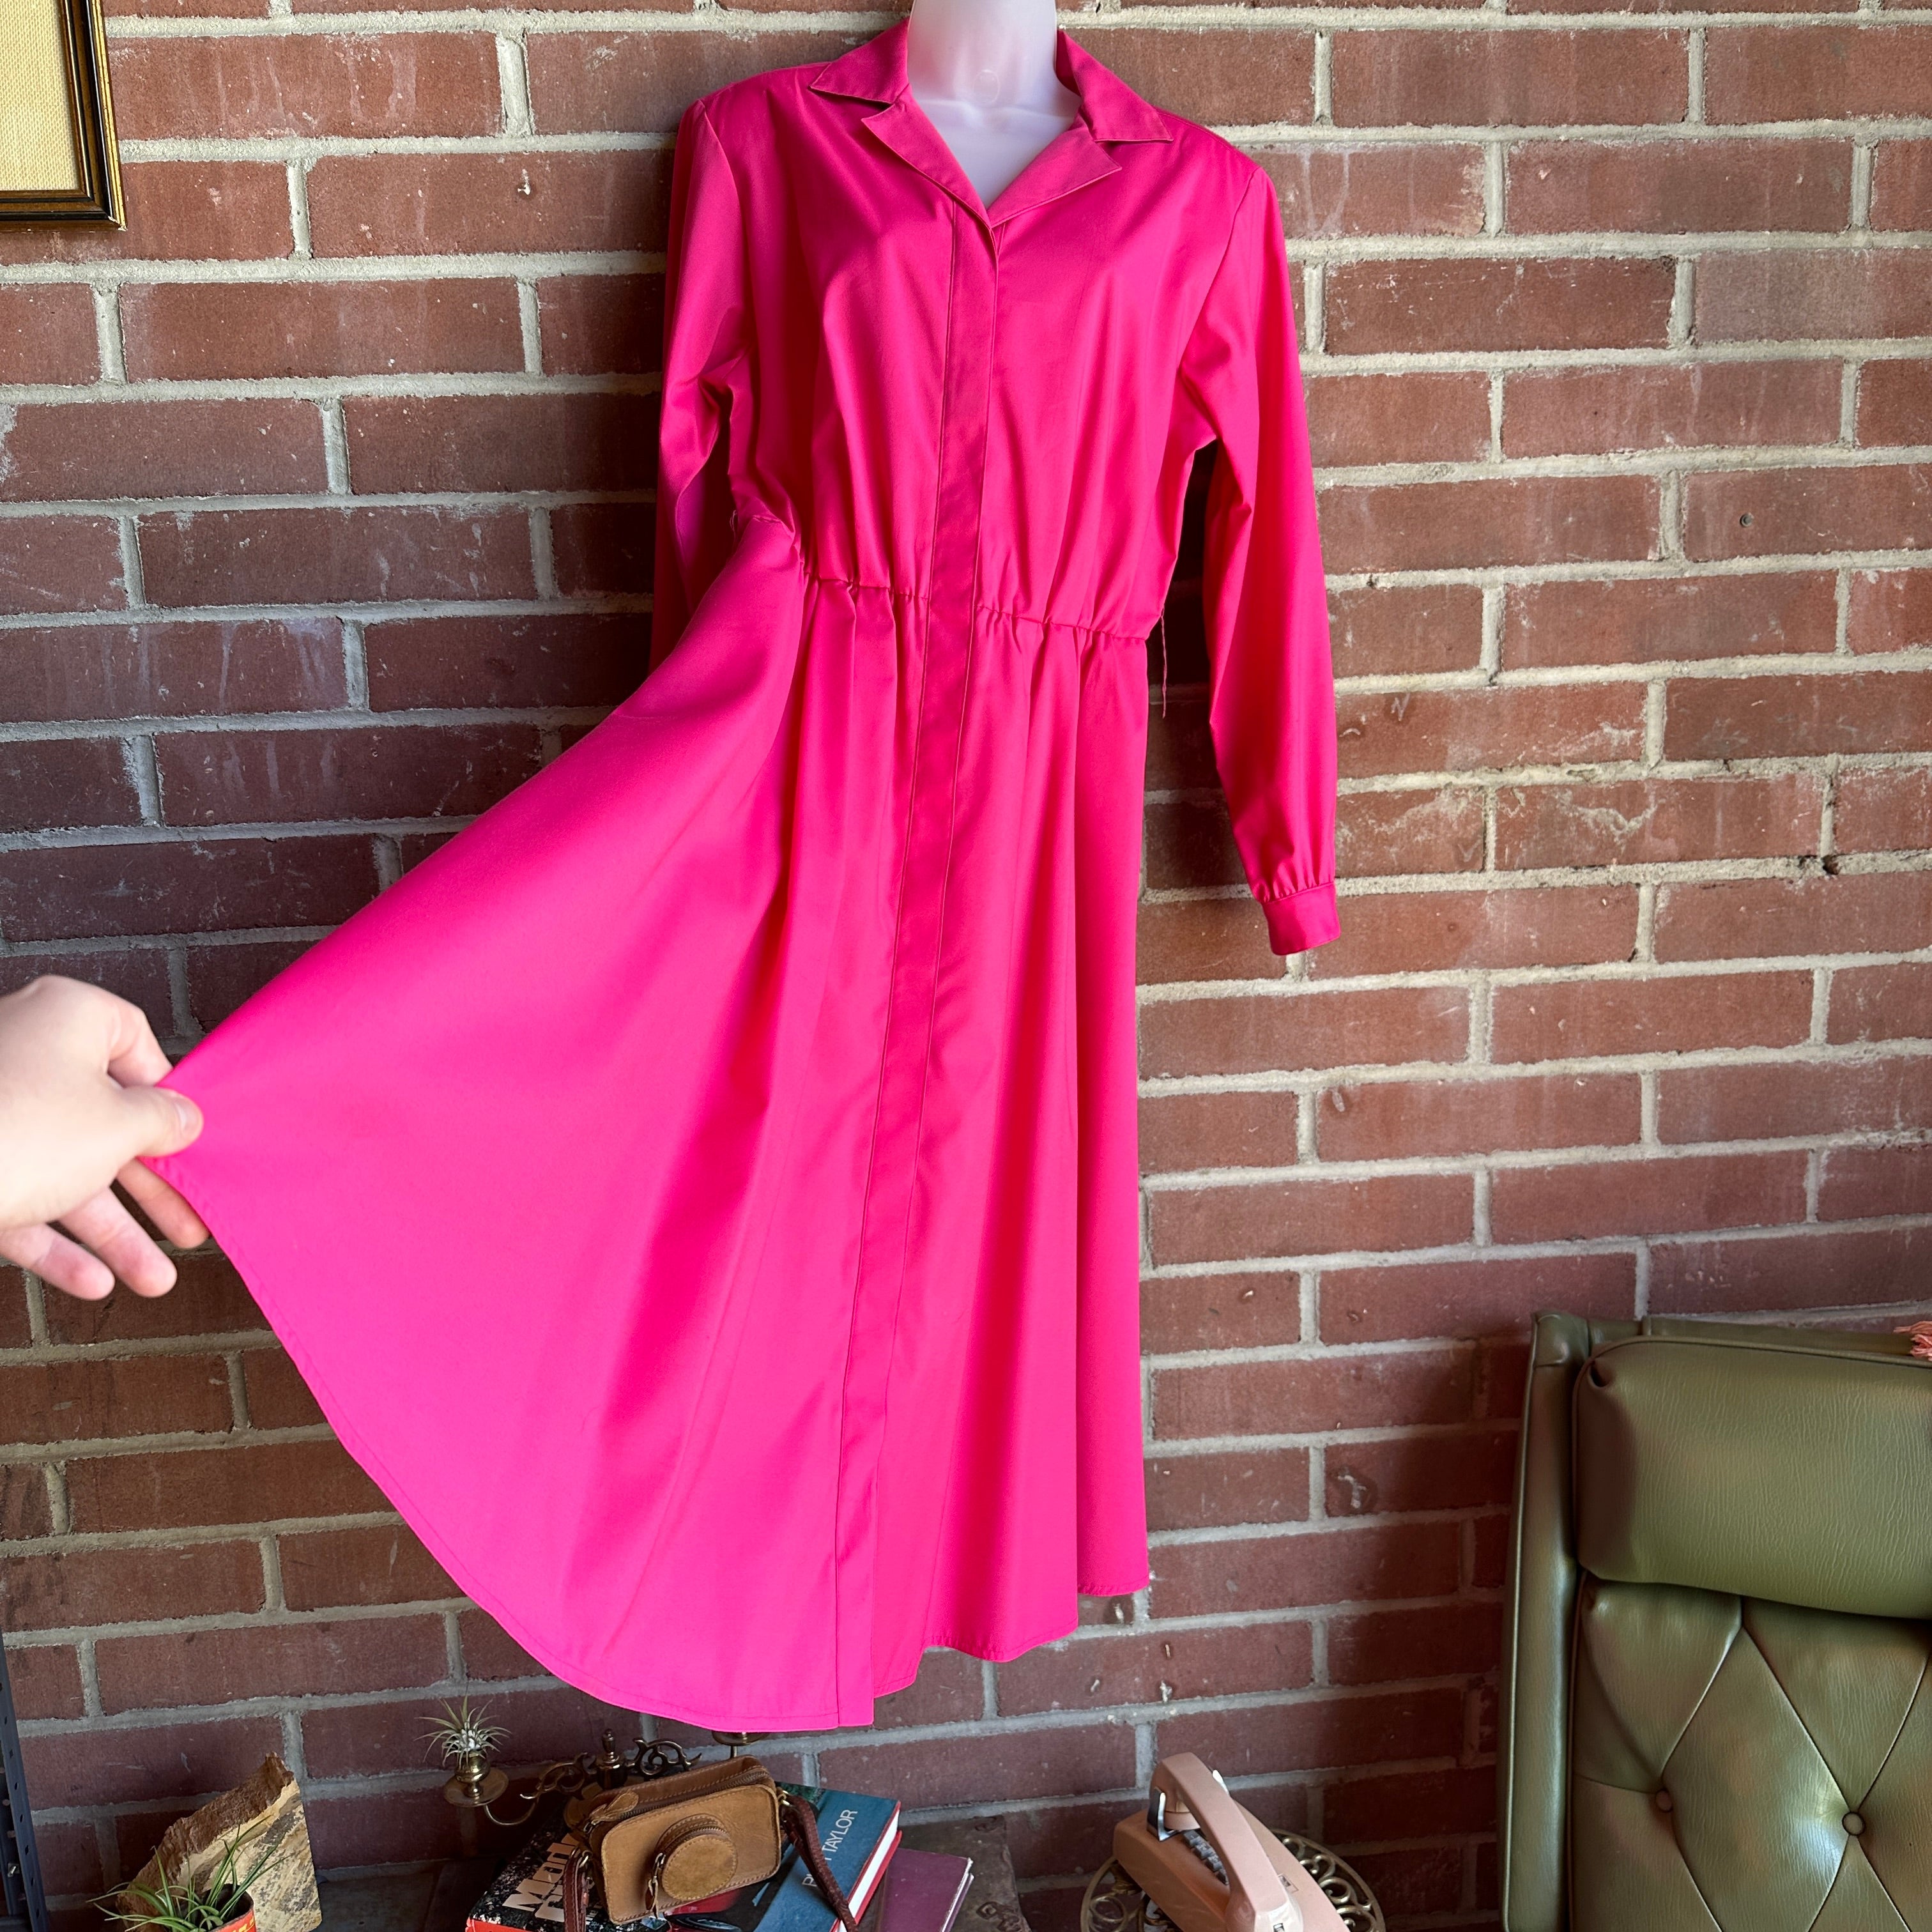 80s Hot Pink “Willi of California, Made in USA” Shirt Dress